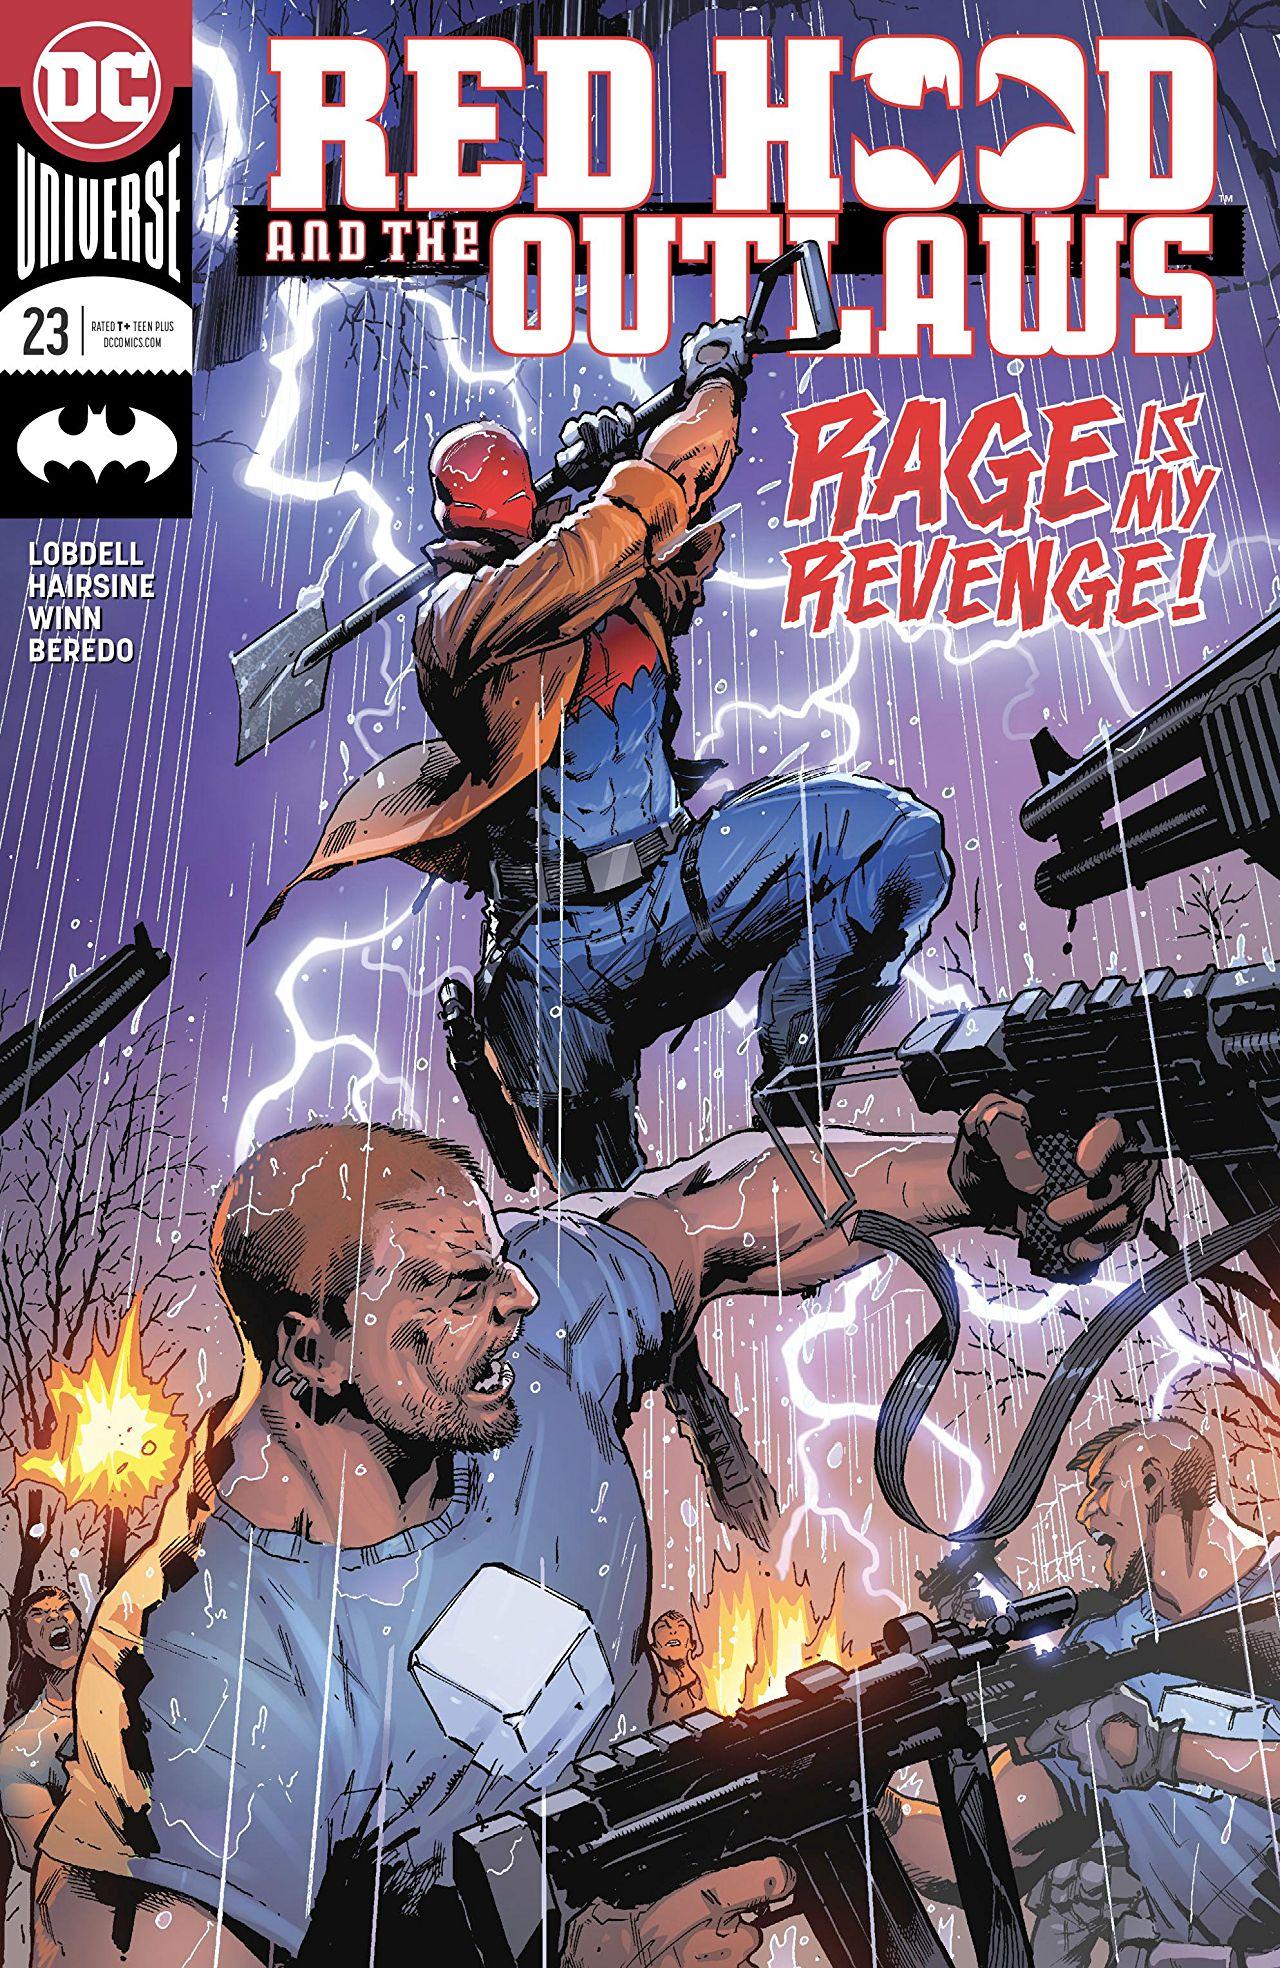 Red Hood and the Outlaws Vol. 2 #23